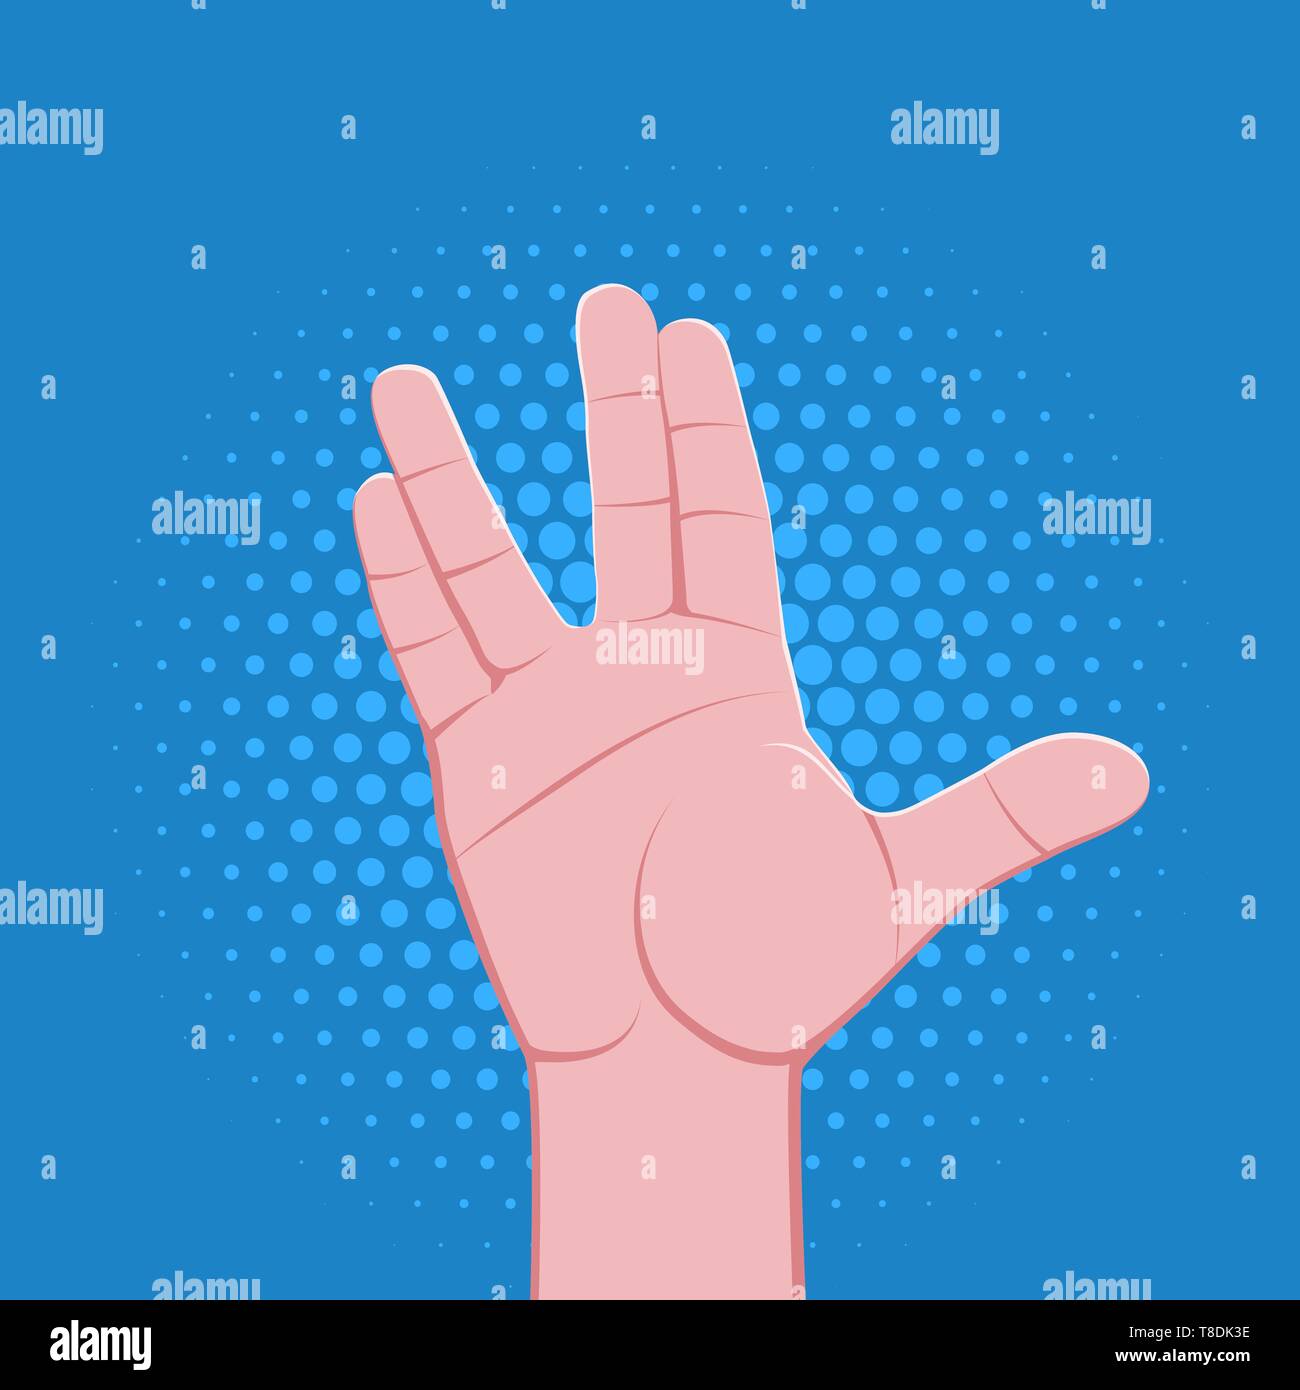 vector symbolic spread fingers male palm hand welcome hello spok gesture concept sign vintage illustration retro poster design isolated on blue dotted Stock Vector